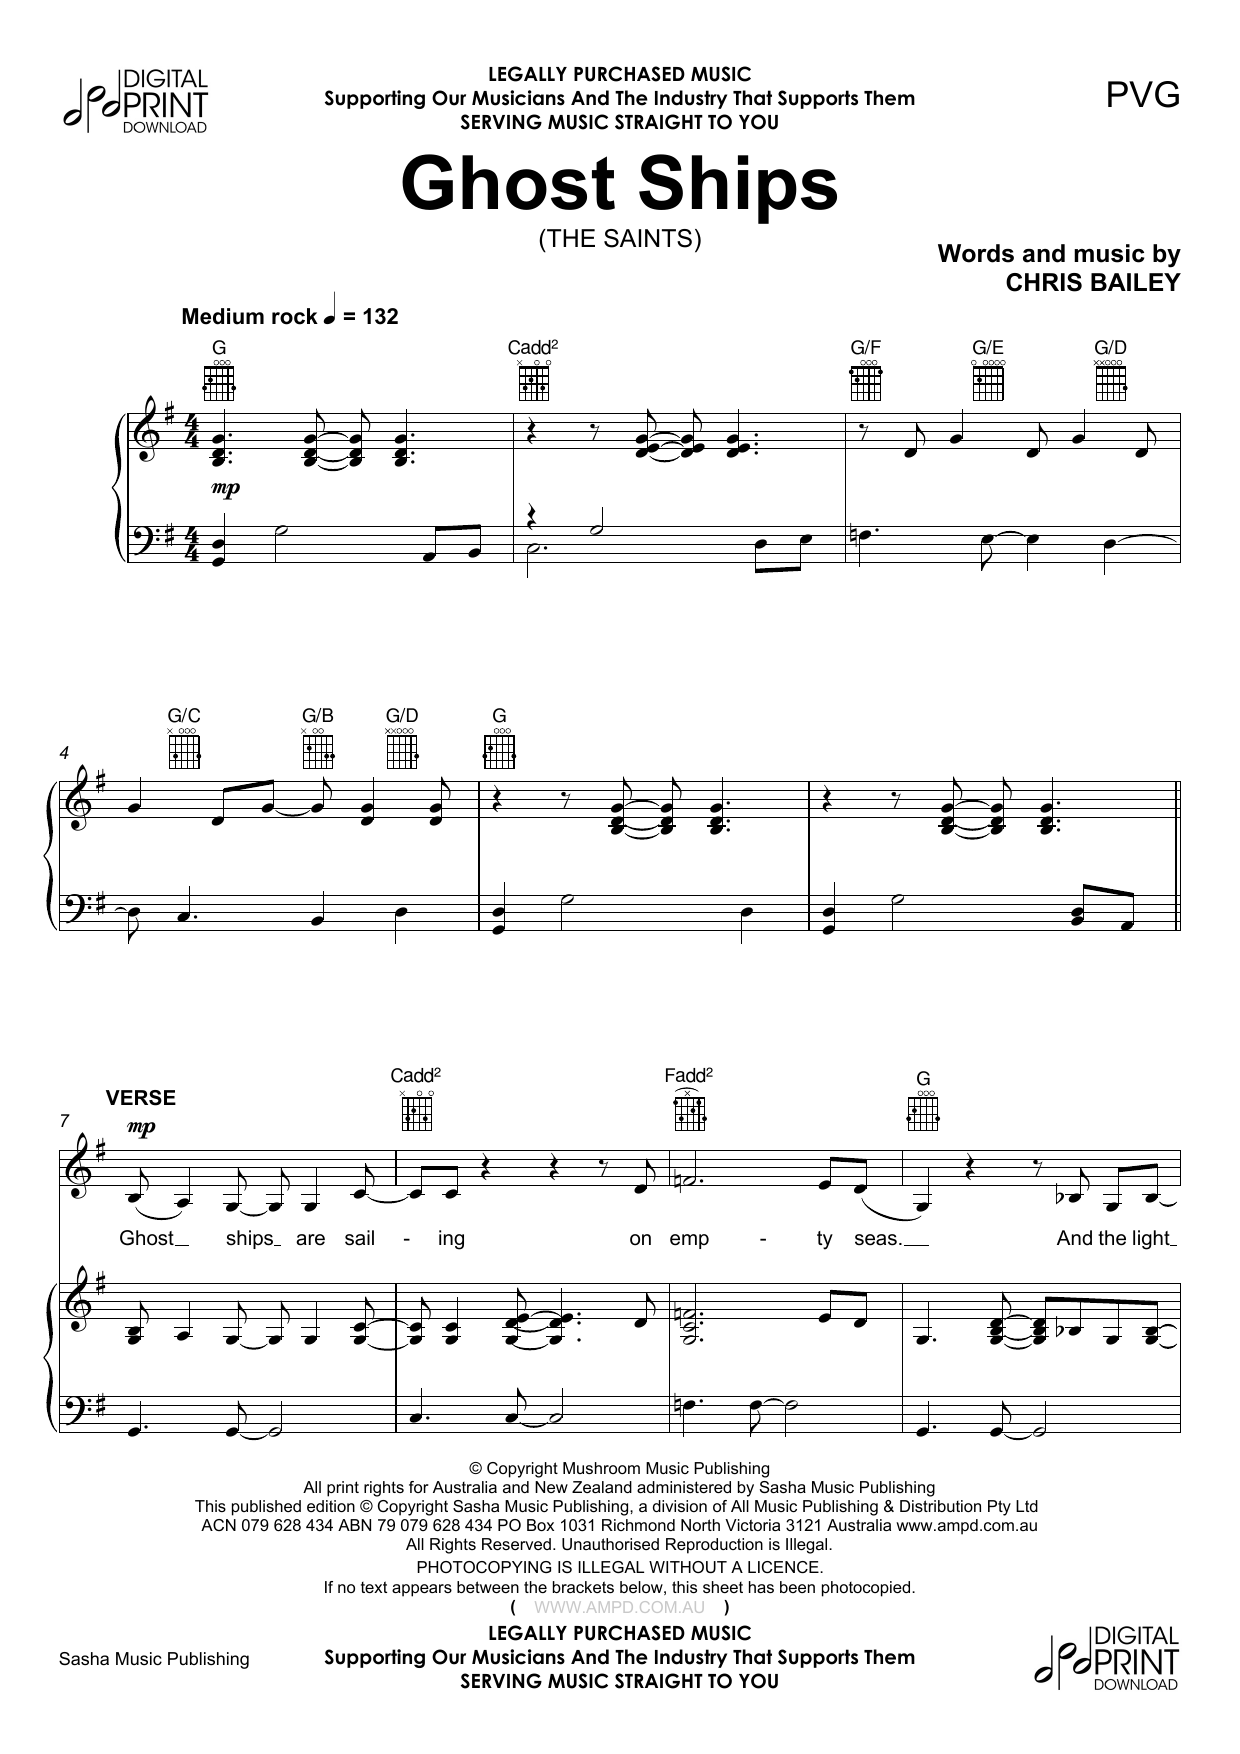 Download The Saints Ghost Ships Sheet Music